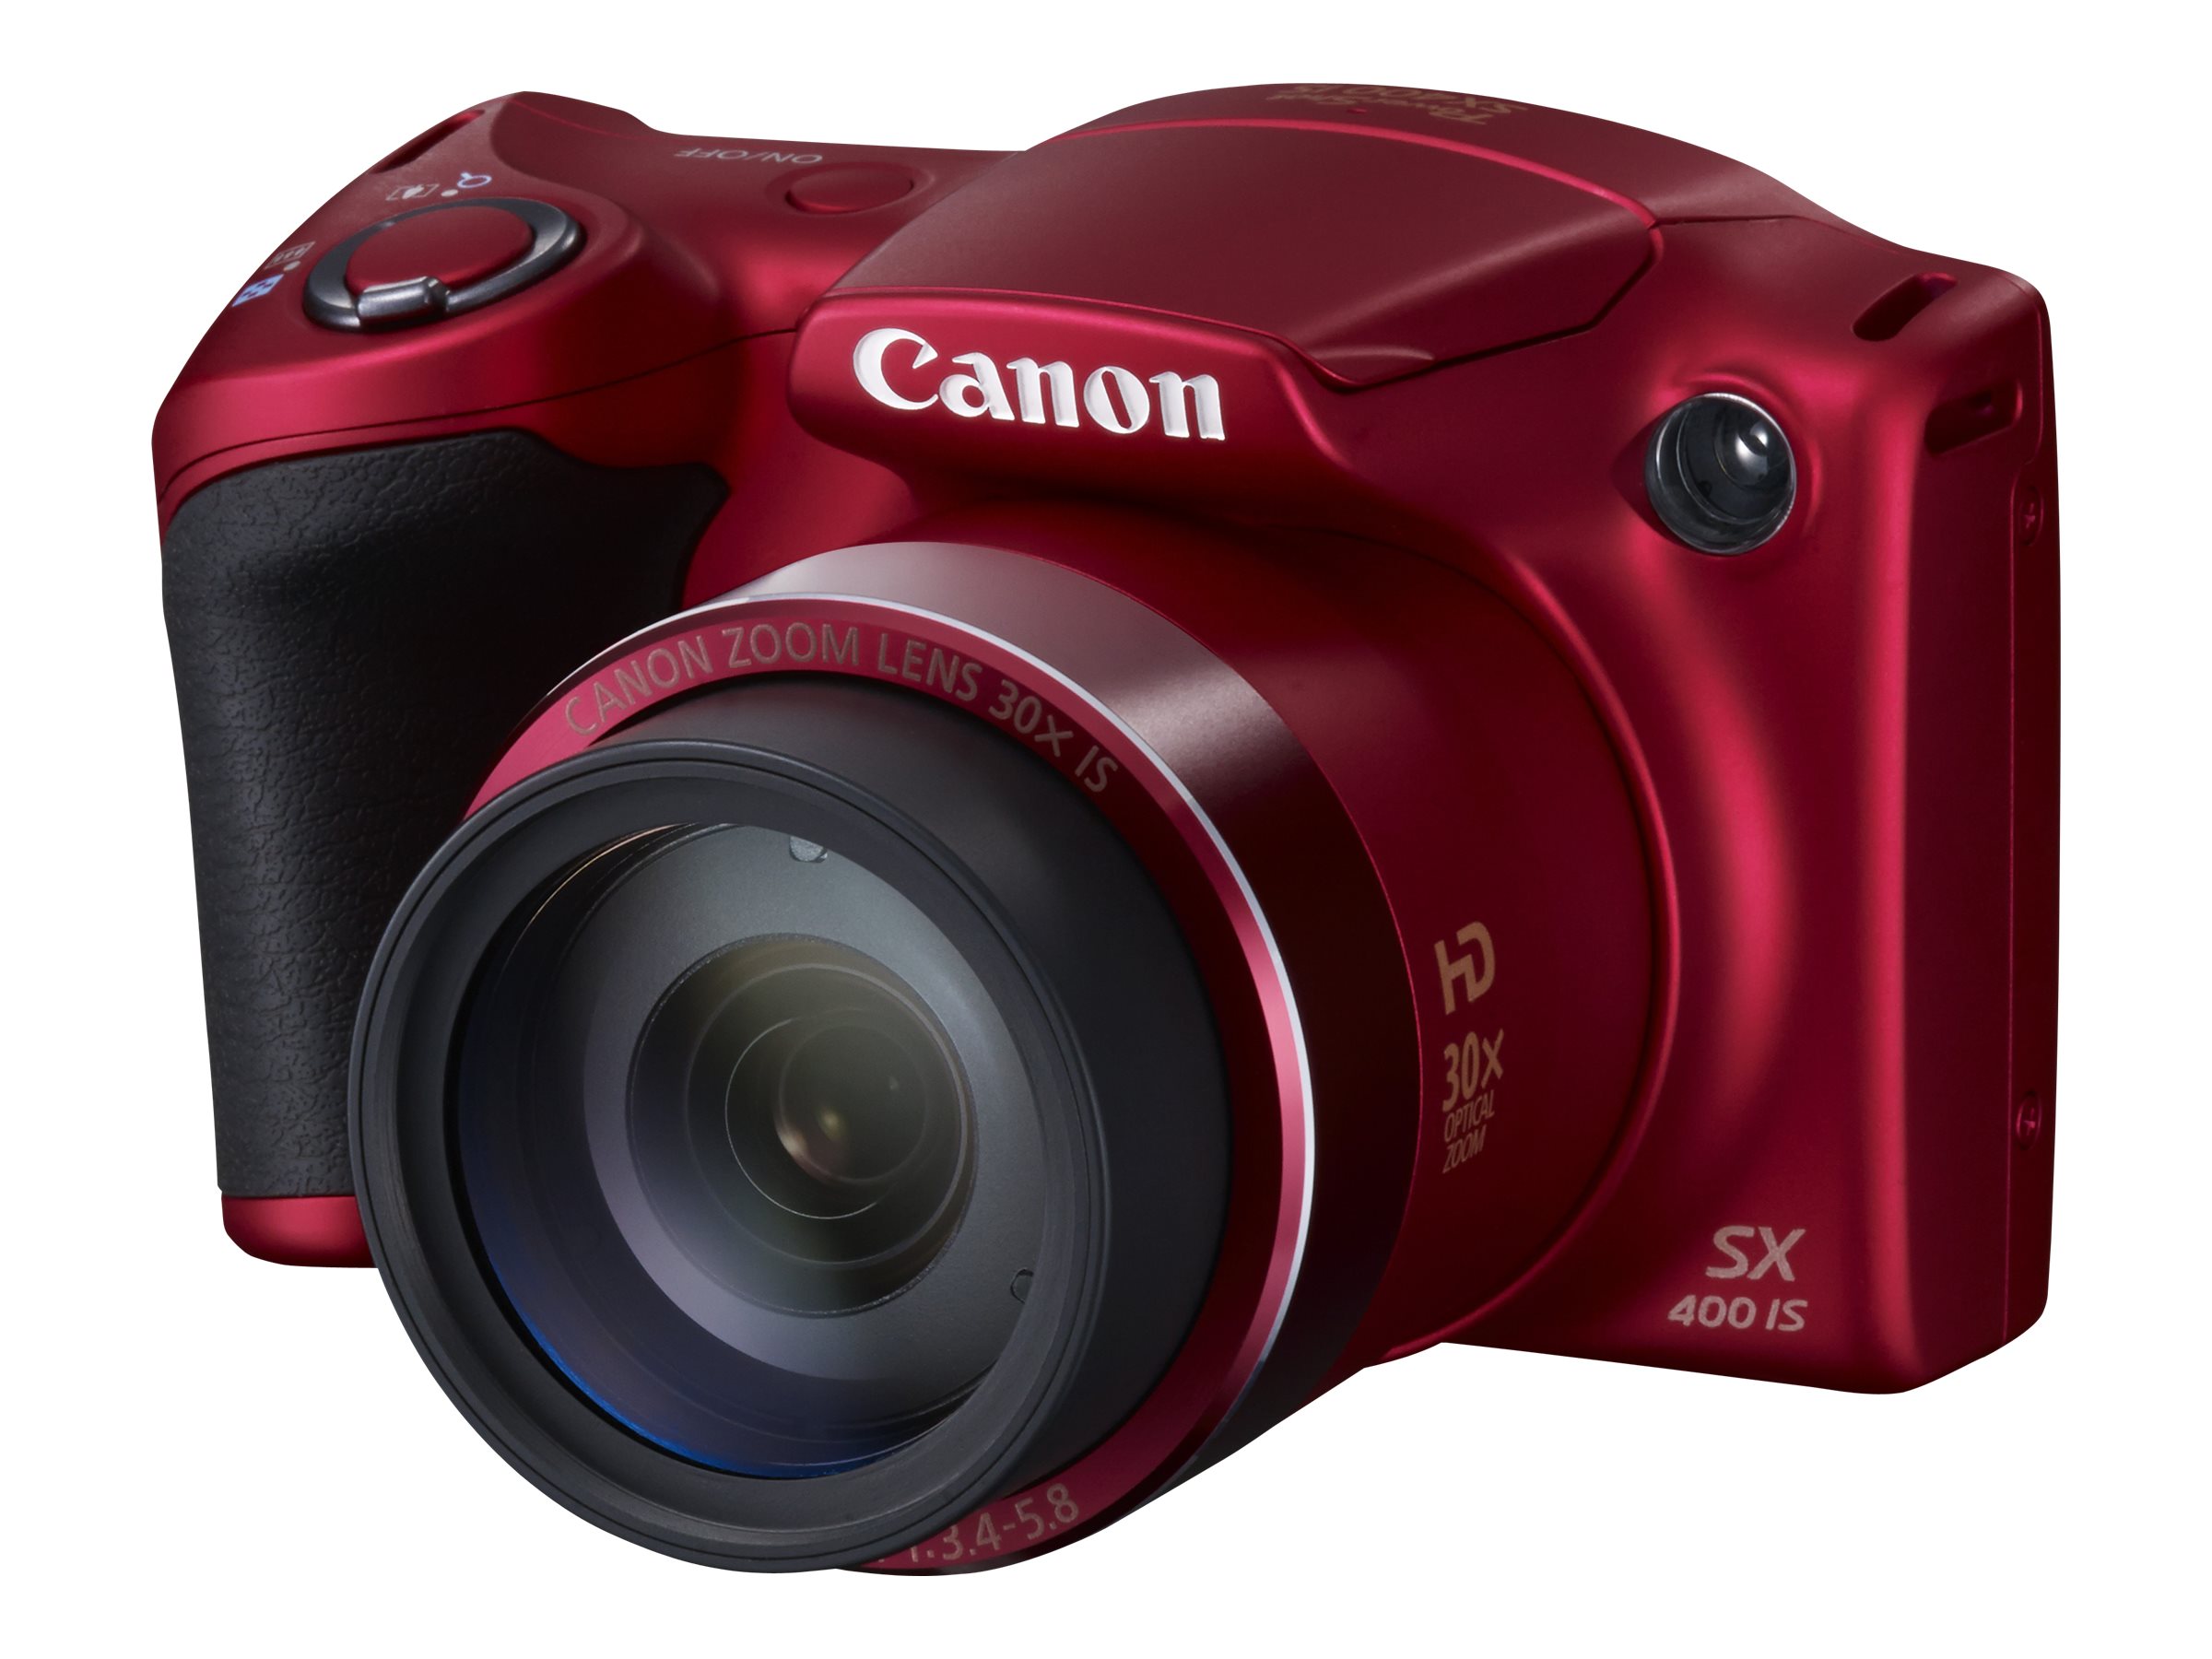 Canon PowerShot SX400 IS - Digital camera - High Definition - compact - 16.0 MP - 30 x optical zoom - red - image 53 of 72